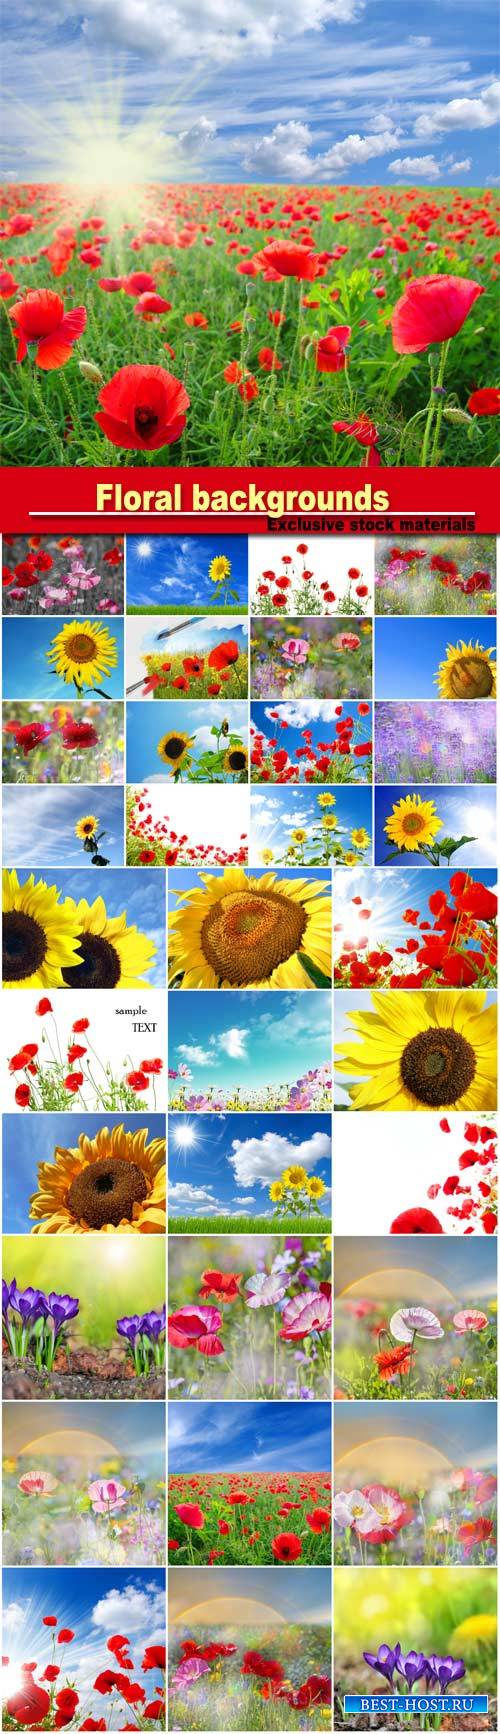 Background with sunflowers and poppies